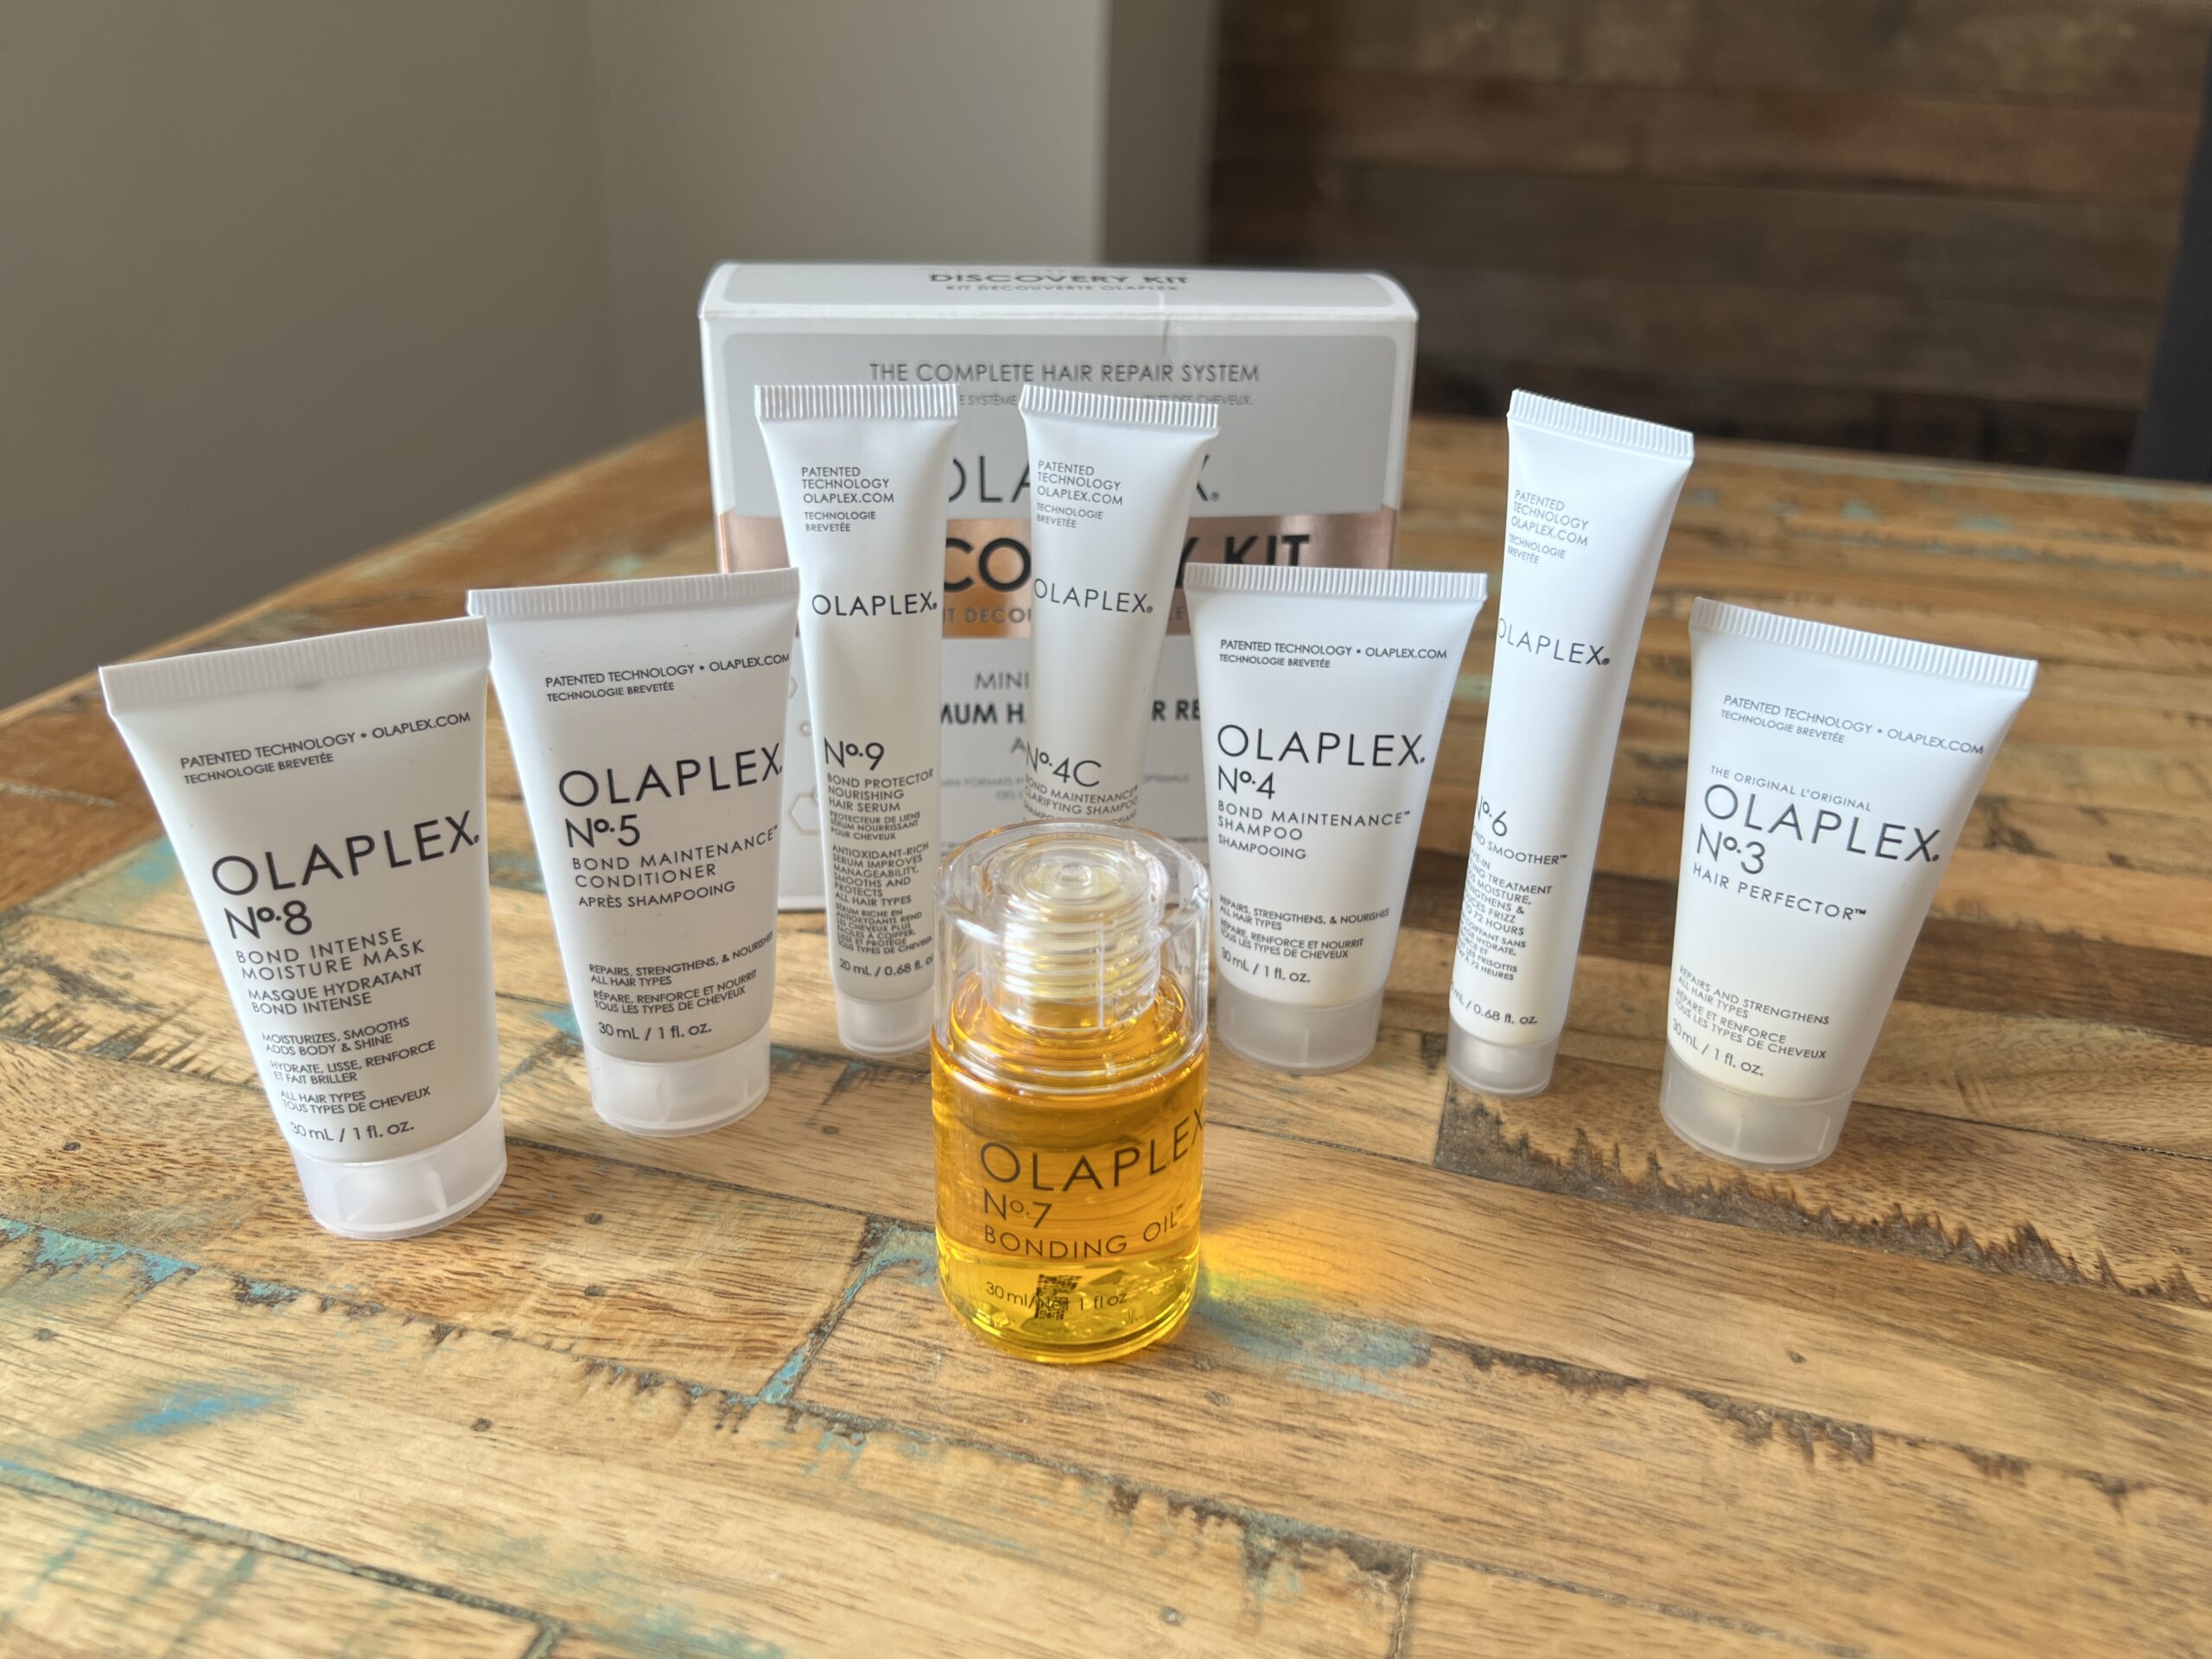 The line up of Olaplex products and their effectiveness in treating dandruff and other hair and scalp issues.